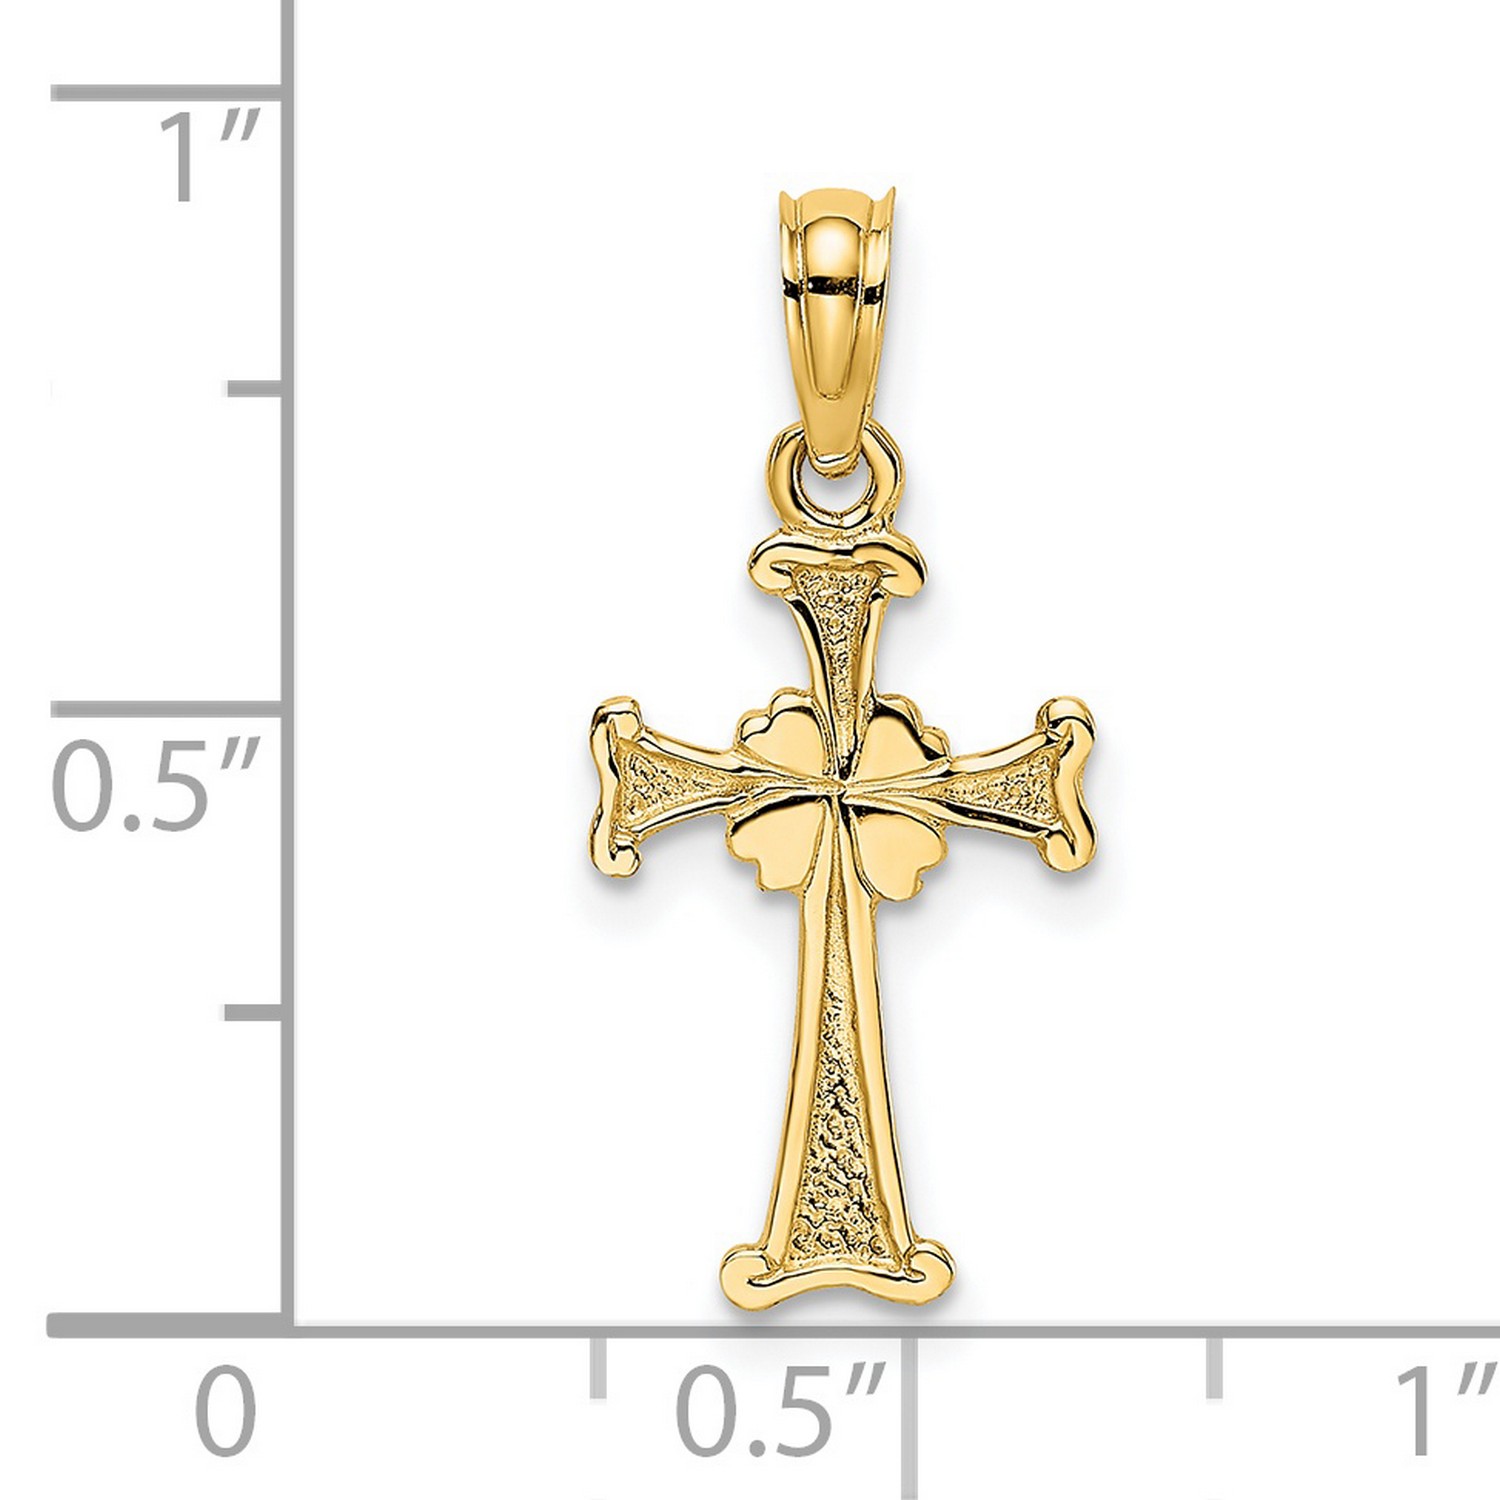 Four 4 Leaf Clover Cross Charm In Real 14k Yellow Gold 0.57gr | eBay